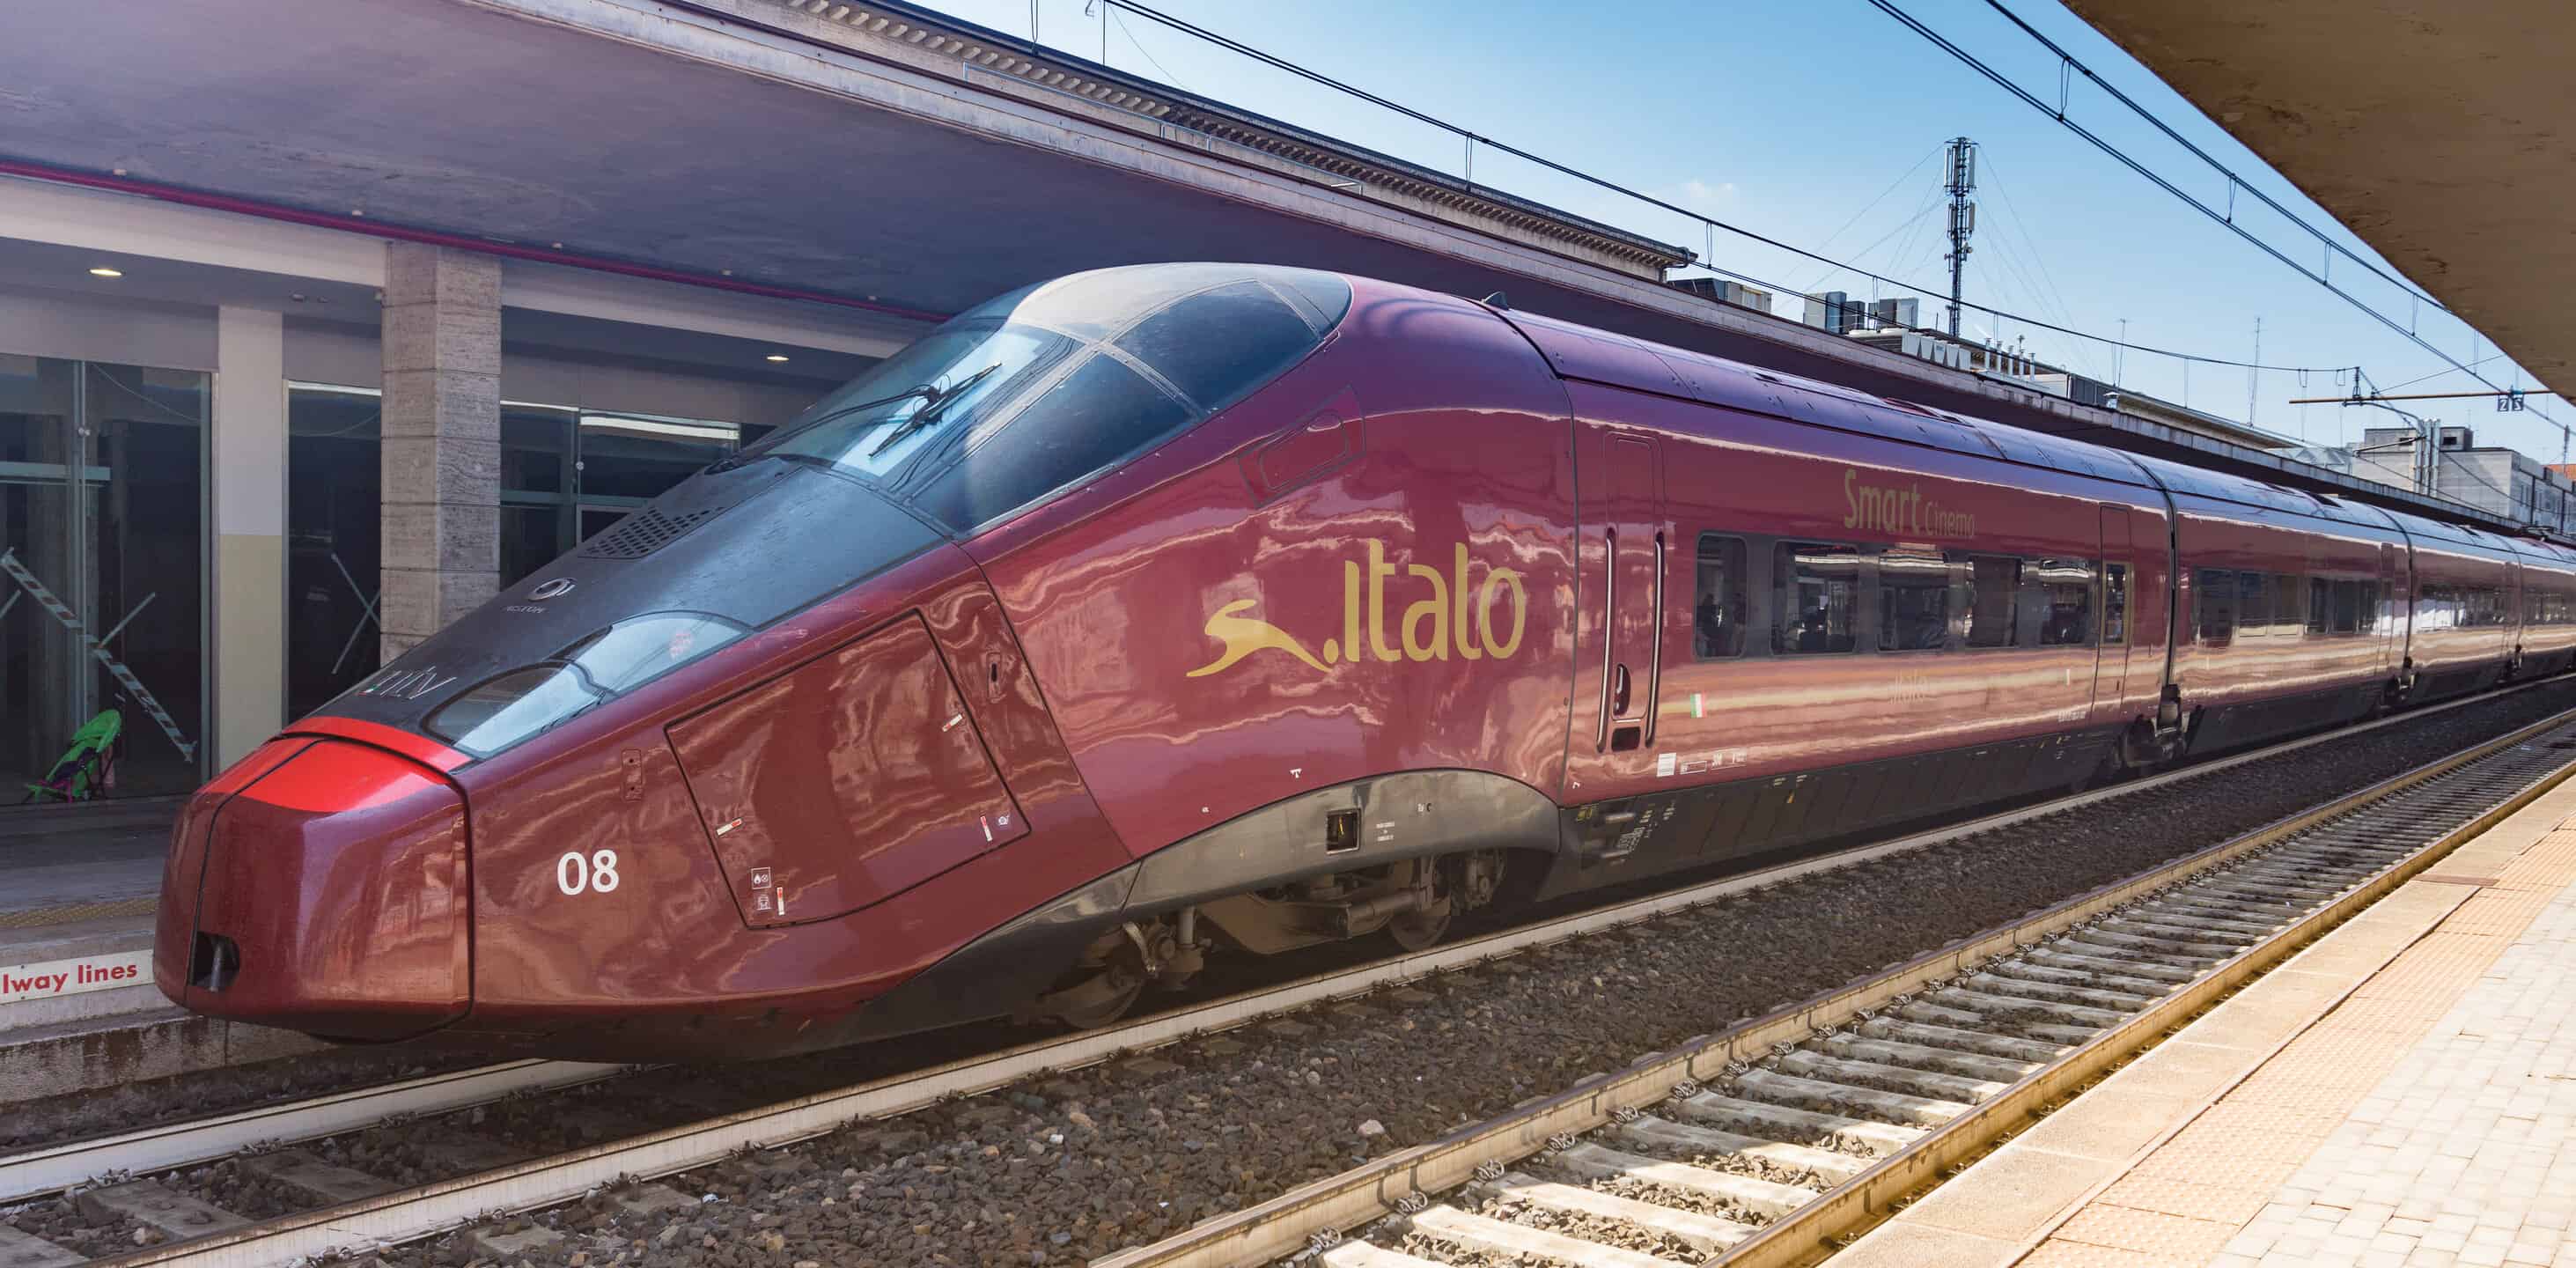 <p>_Vive la France_ for this sensation of engineering (although it operates strictly in Italy). France's <a href="https://www.railway-technology.com/projects/alstom-agv-very-high-speed-trains-france/?cf-view">AGV Italo</a> (or the Green Bullet) is fast but far from being as fast as the Asian Maglev trains. It clocks at around 224 mph, making it the <a href="https://a-z-animals.com/blog/see-the-7-fastest-trains-on-earth/?utm_campaign=msn&utm_source=msn_slideshow&utm_content=1326407&utm_medium=in_content">fastest train in Europe</a>. The vehicle shines in its negligible pollution, making it perhaps the most eco-friendly railcar in the world. The AGV Italo employs innovative technologies to consume energy and produce fewer emissions. These improvements include a lightweight design, aerodynamic shape, and efficient propulsion systems.</p>    <p>But going extreme green doesn't mean losing travel experience. Passengers on the Green Bullet enjoy a smooth ride, large and comfortable interior compartments, wide gangways, and passenger facilities like onboard internet.</p><p>Sharks, lions, alligators, and more! Don’t miss today’s latest and most exciting animal news. <strong><a href="https://www.msn.com/en-us/channel/source/AZ%20Animals%20US/sr-vid-7etr9q8xun6k6508c3nufaum0de3dqktiq6h27ddeagnfug30wka">Click here to access the A-Z Animals profile page</a> and be sure to hit the <em>Follow</em> button here or at the top of this article!</strong></p> <p>Have feedback? Add a comment below!</p>